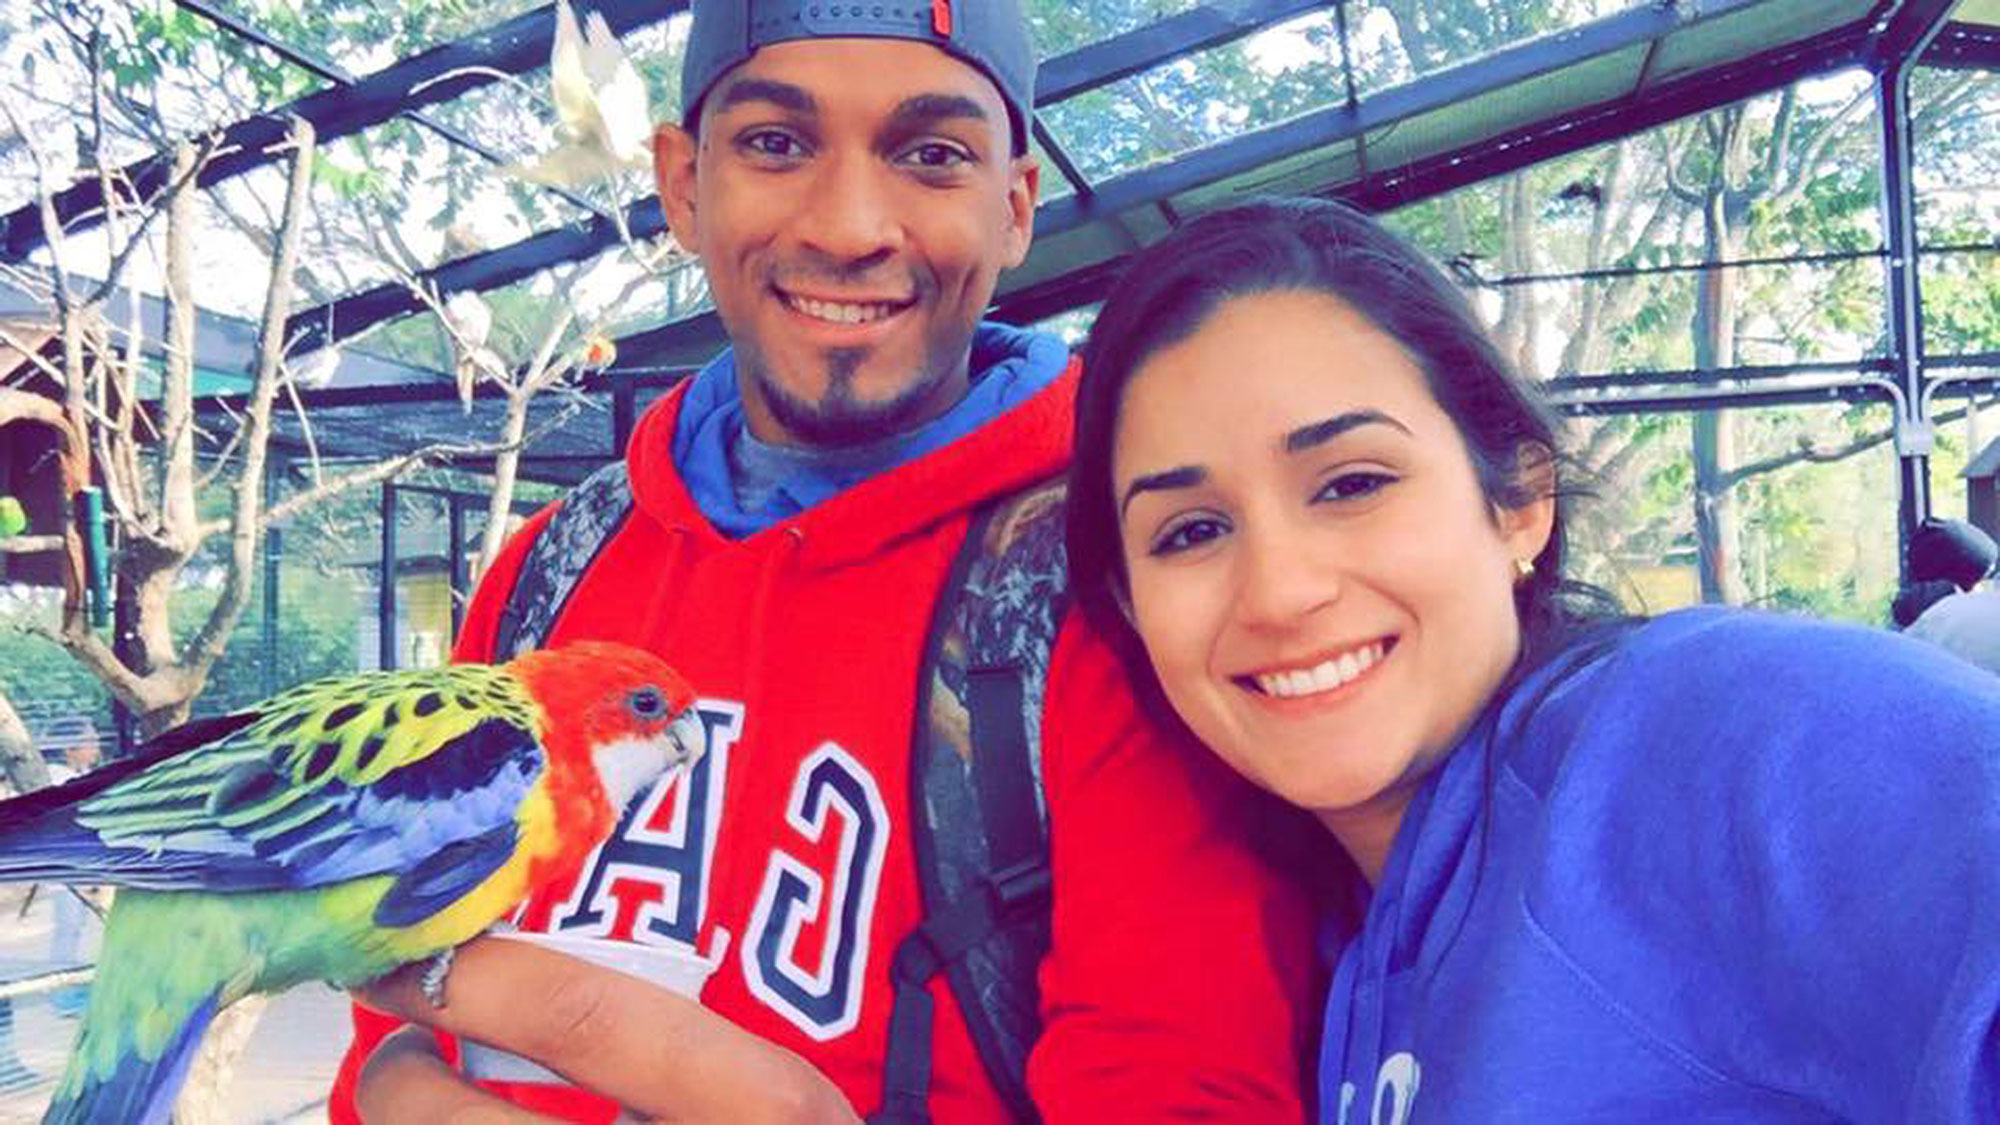 Baseball Player Danry Vasquez's Ex Opens Up About Her Vicious Beating Caught On Camera